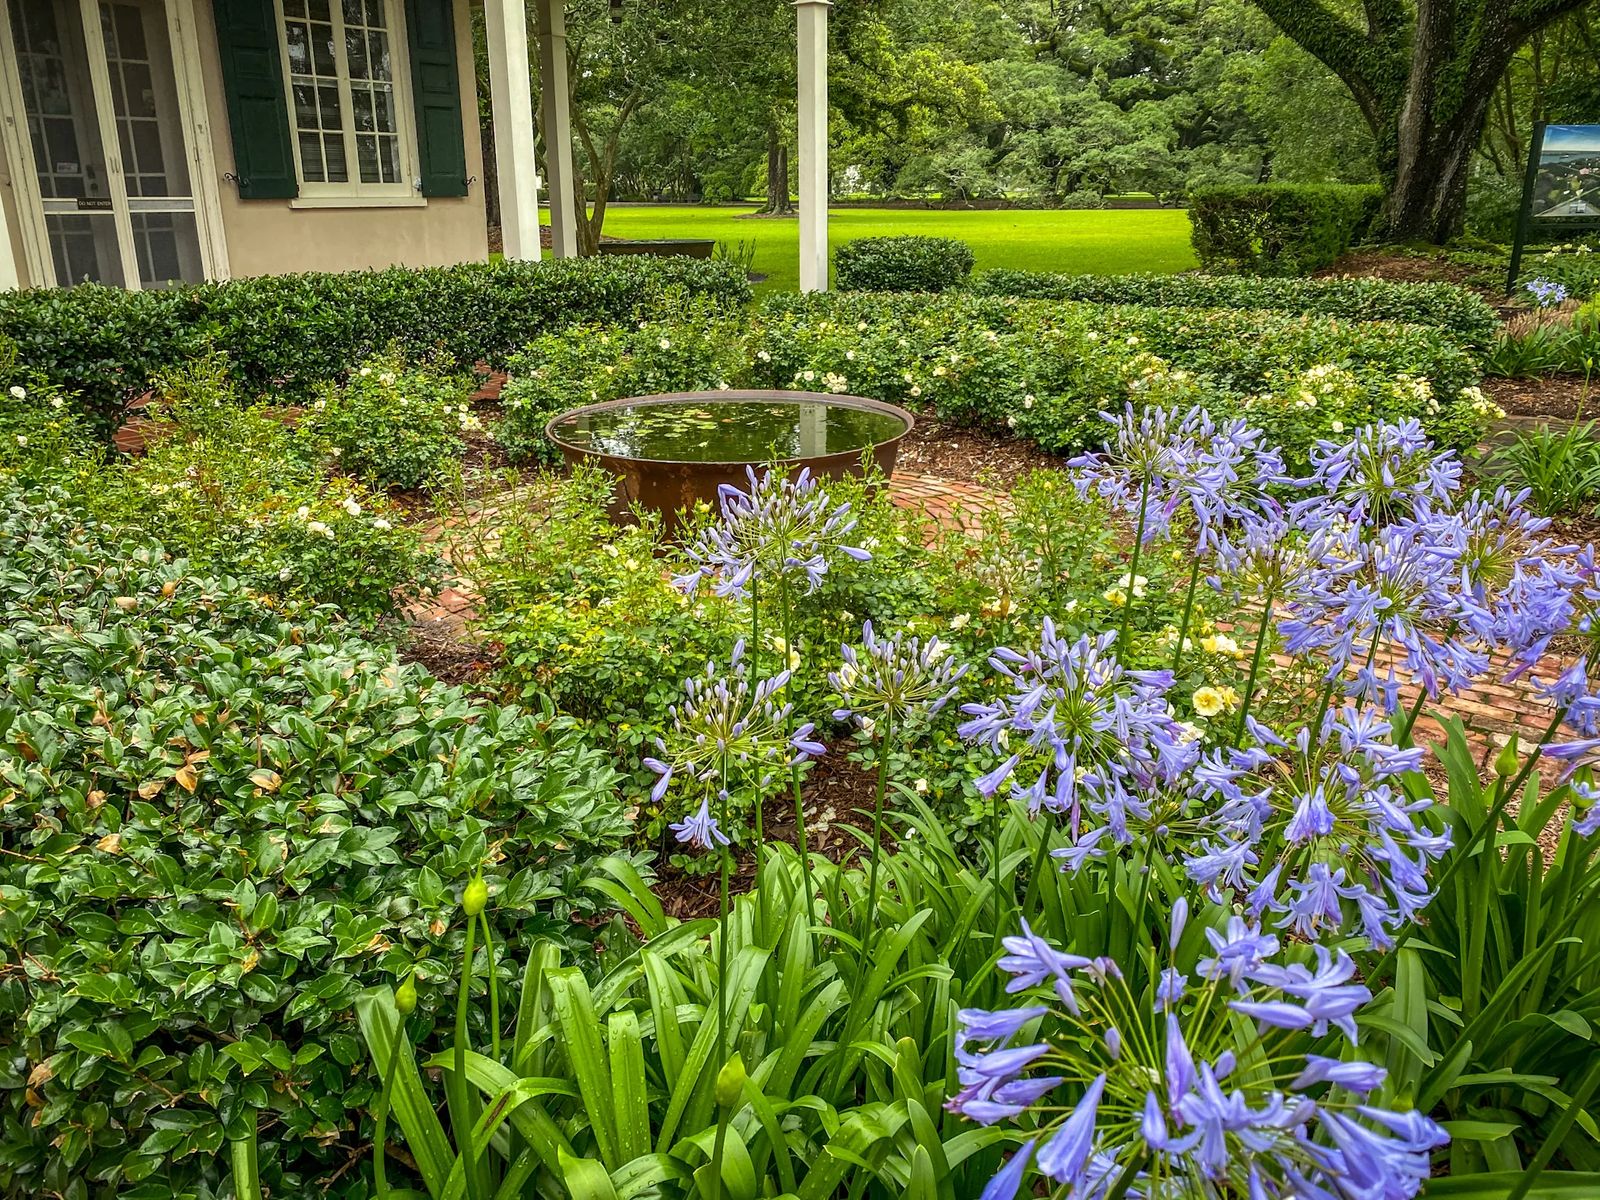 Blue bonnet flowers in carefully manicured garden with metal basin full of water